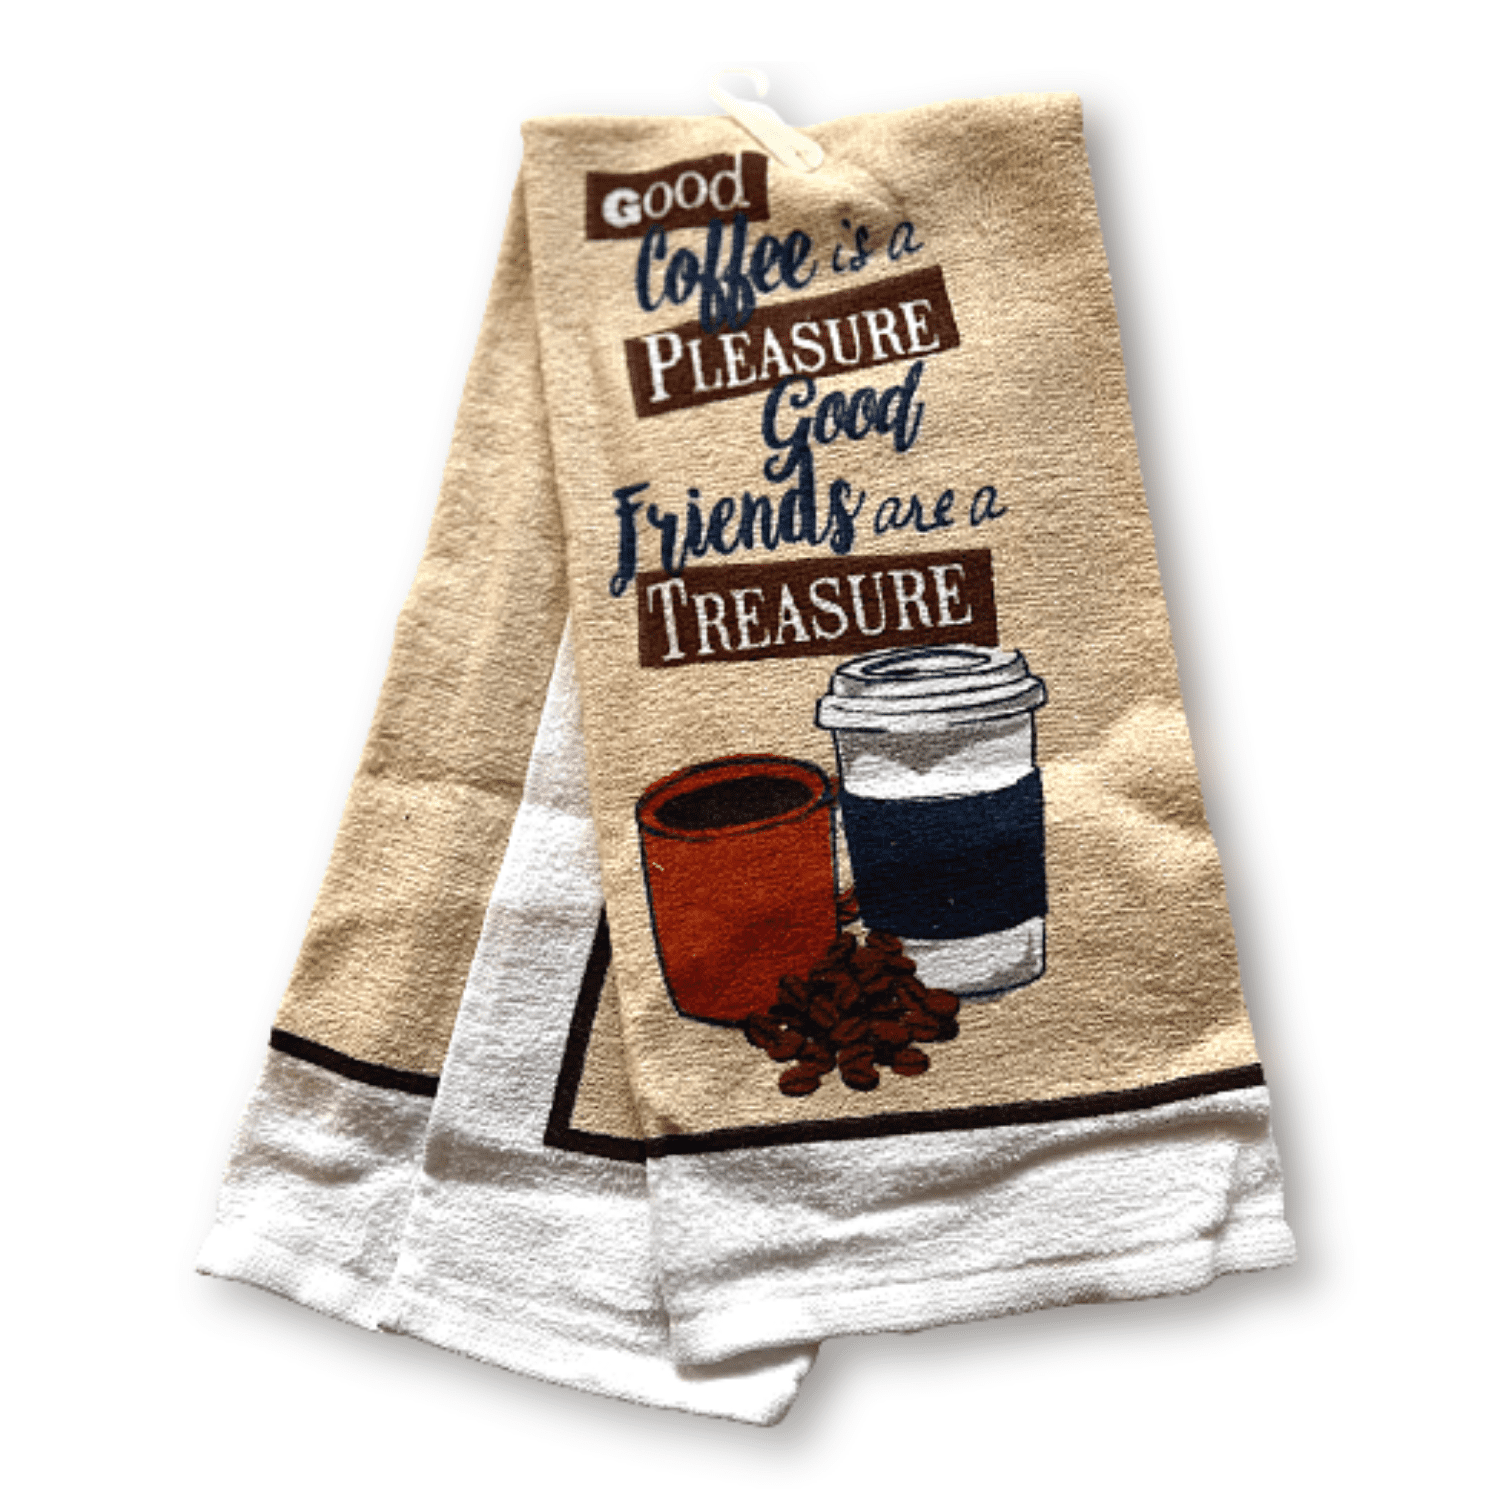 Products :: 997 Hanging dish towels with fancy coffee theme. You choose  color, quantity; Designer Coffee kitchen towels. Kitchen decor gifts, coffee  bar